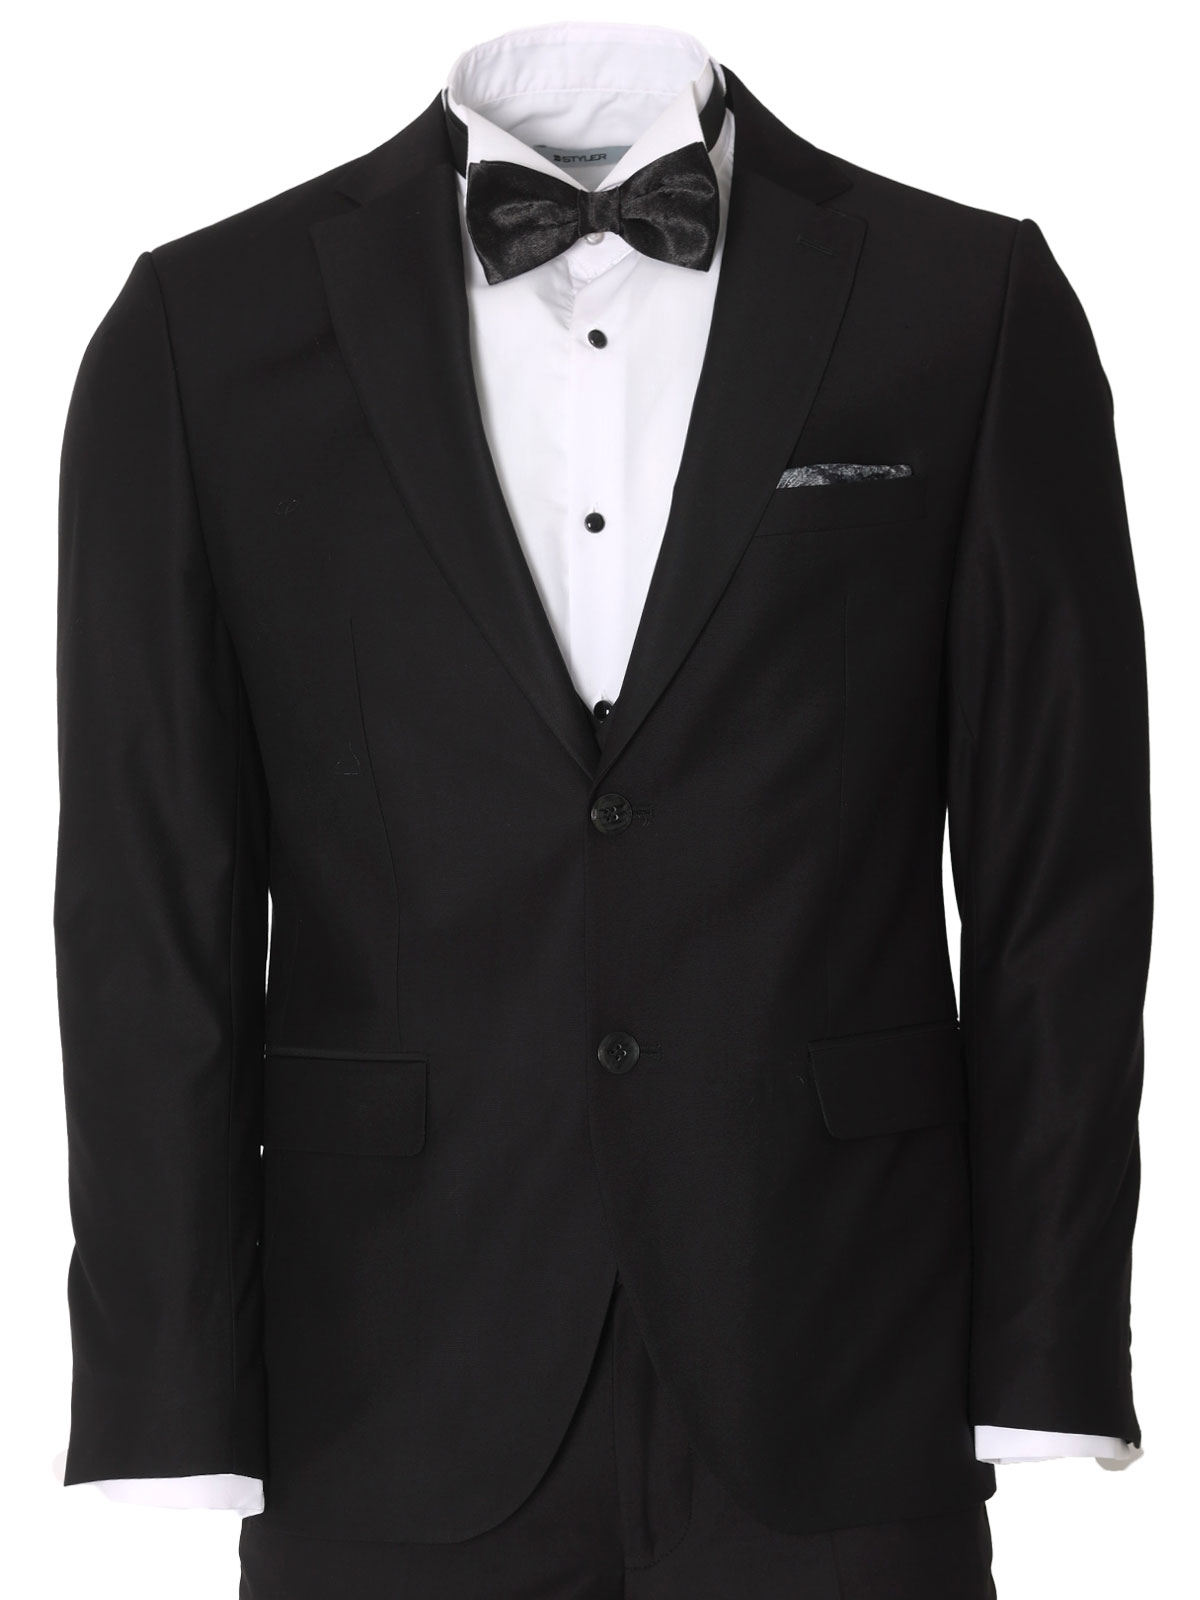 Suit in classic black color - 68074 € 236.22 img3